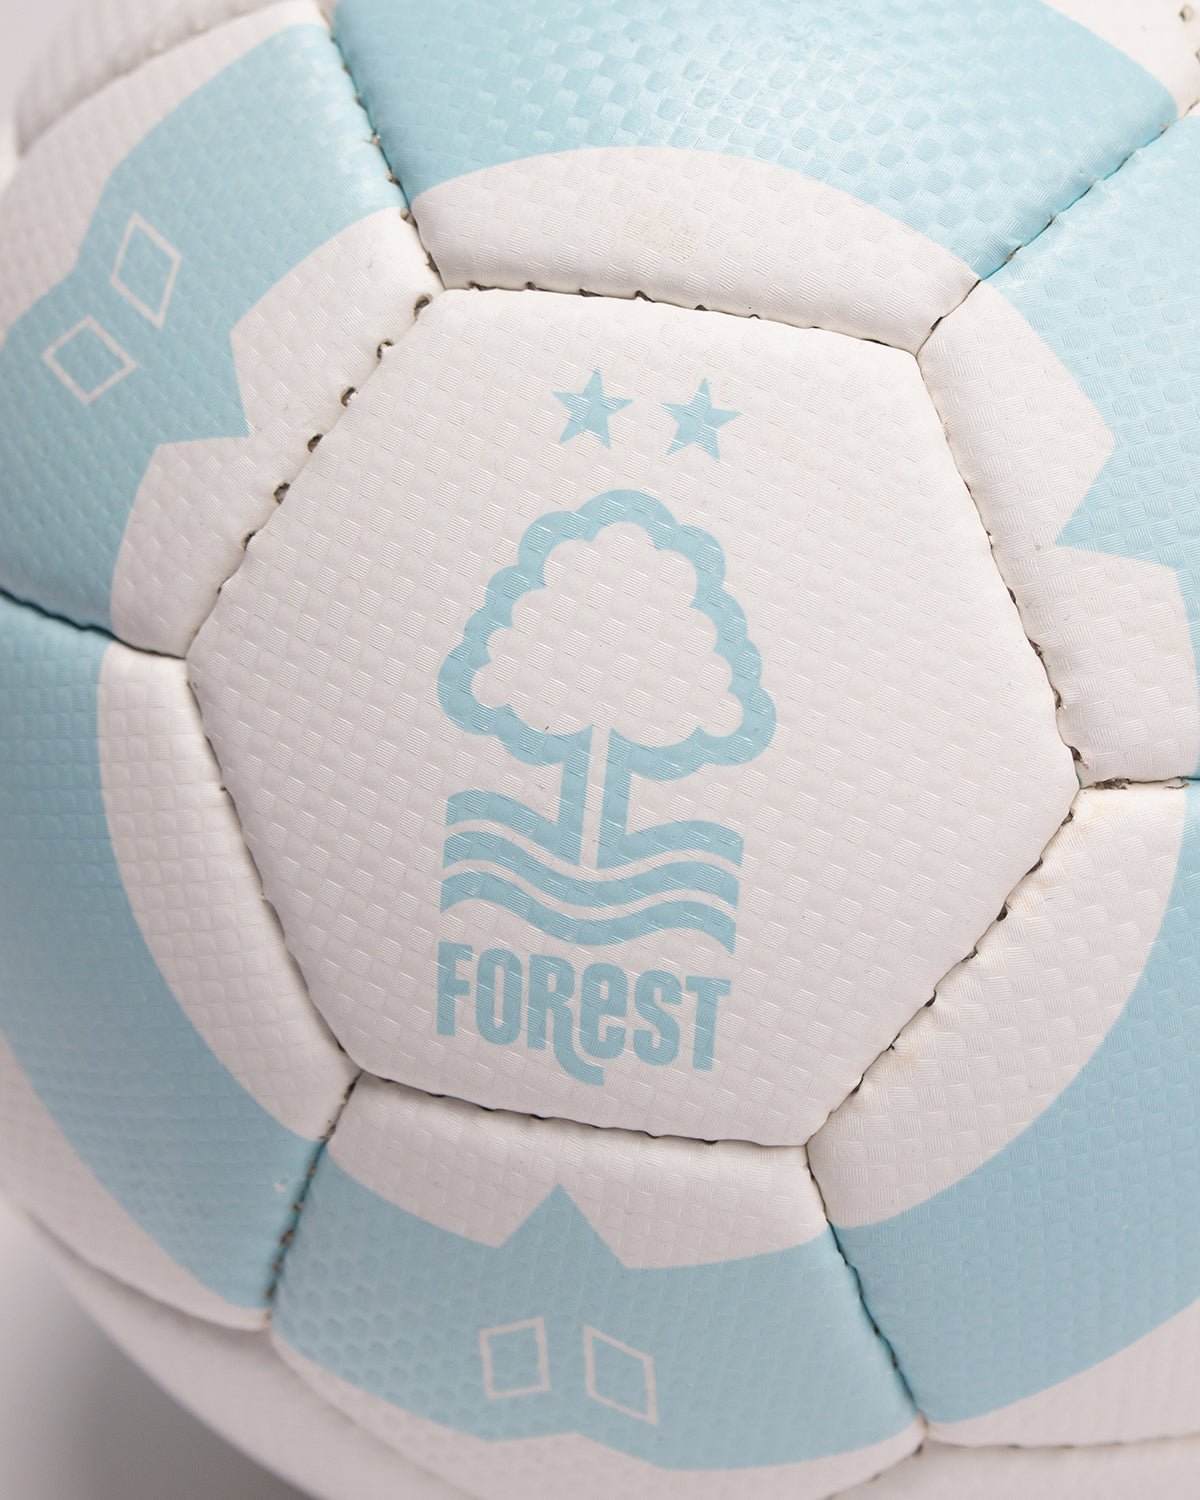 NFFC White Hoop Football - Size 1 - Nottingham Forest FC